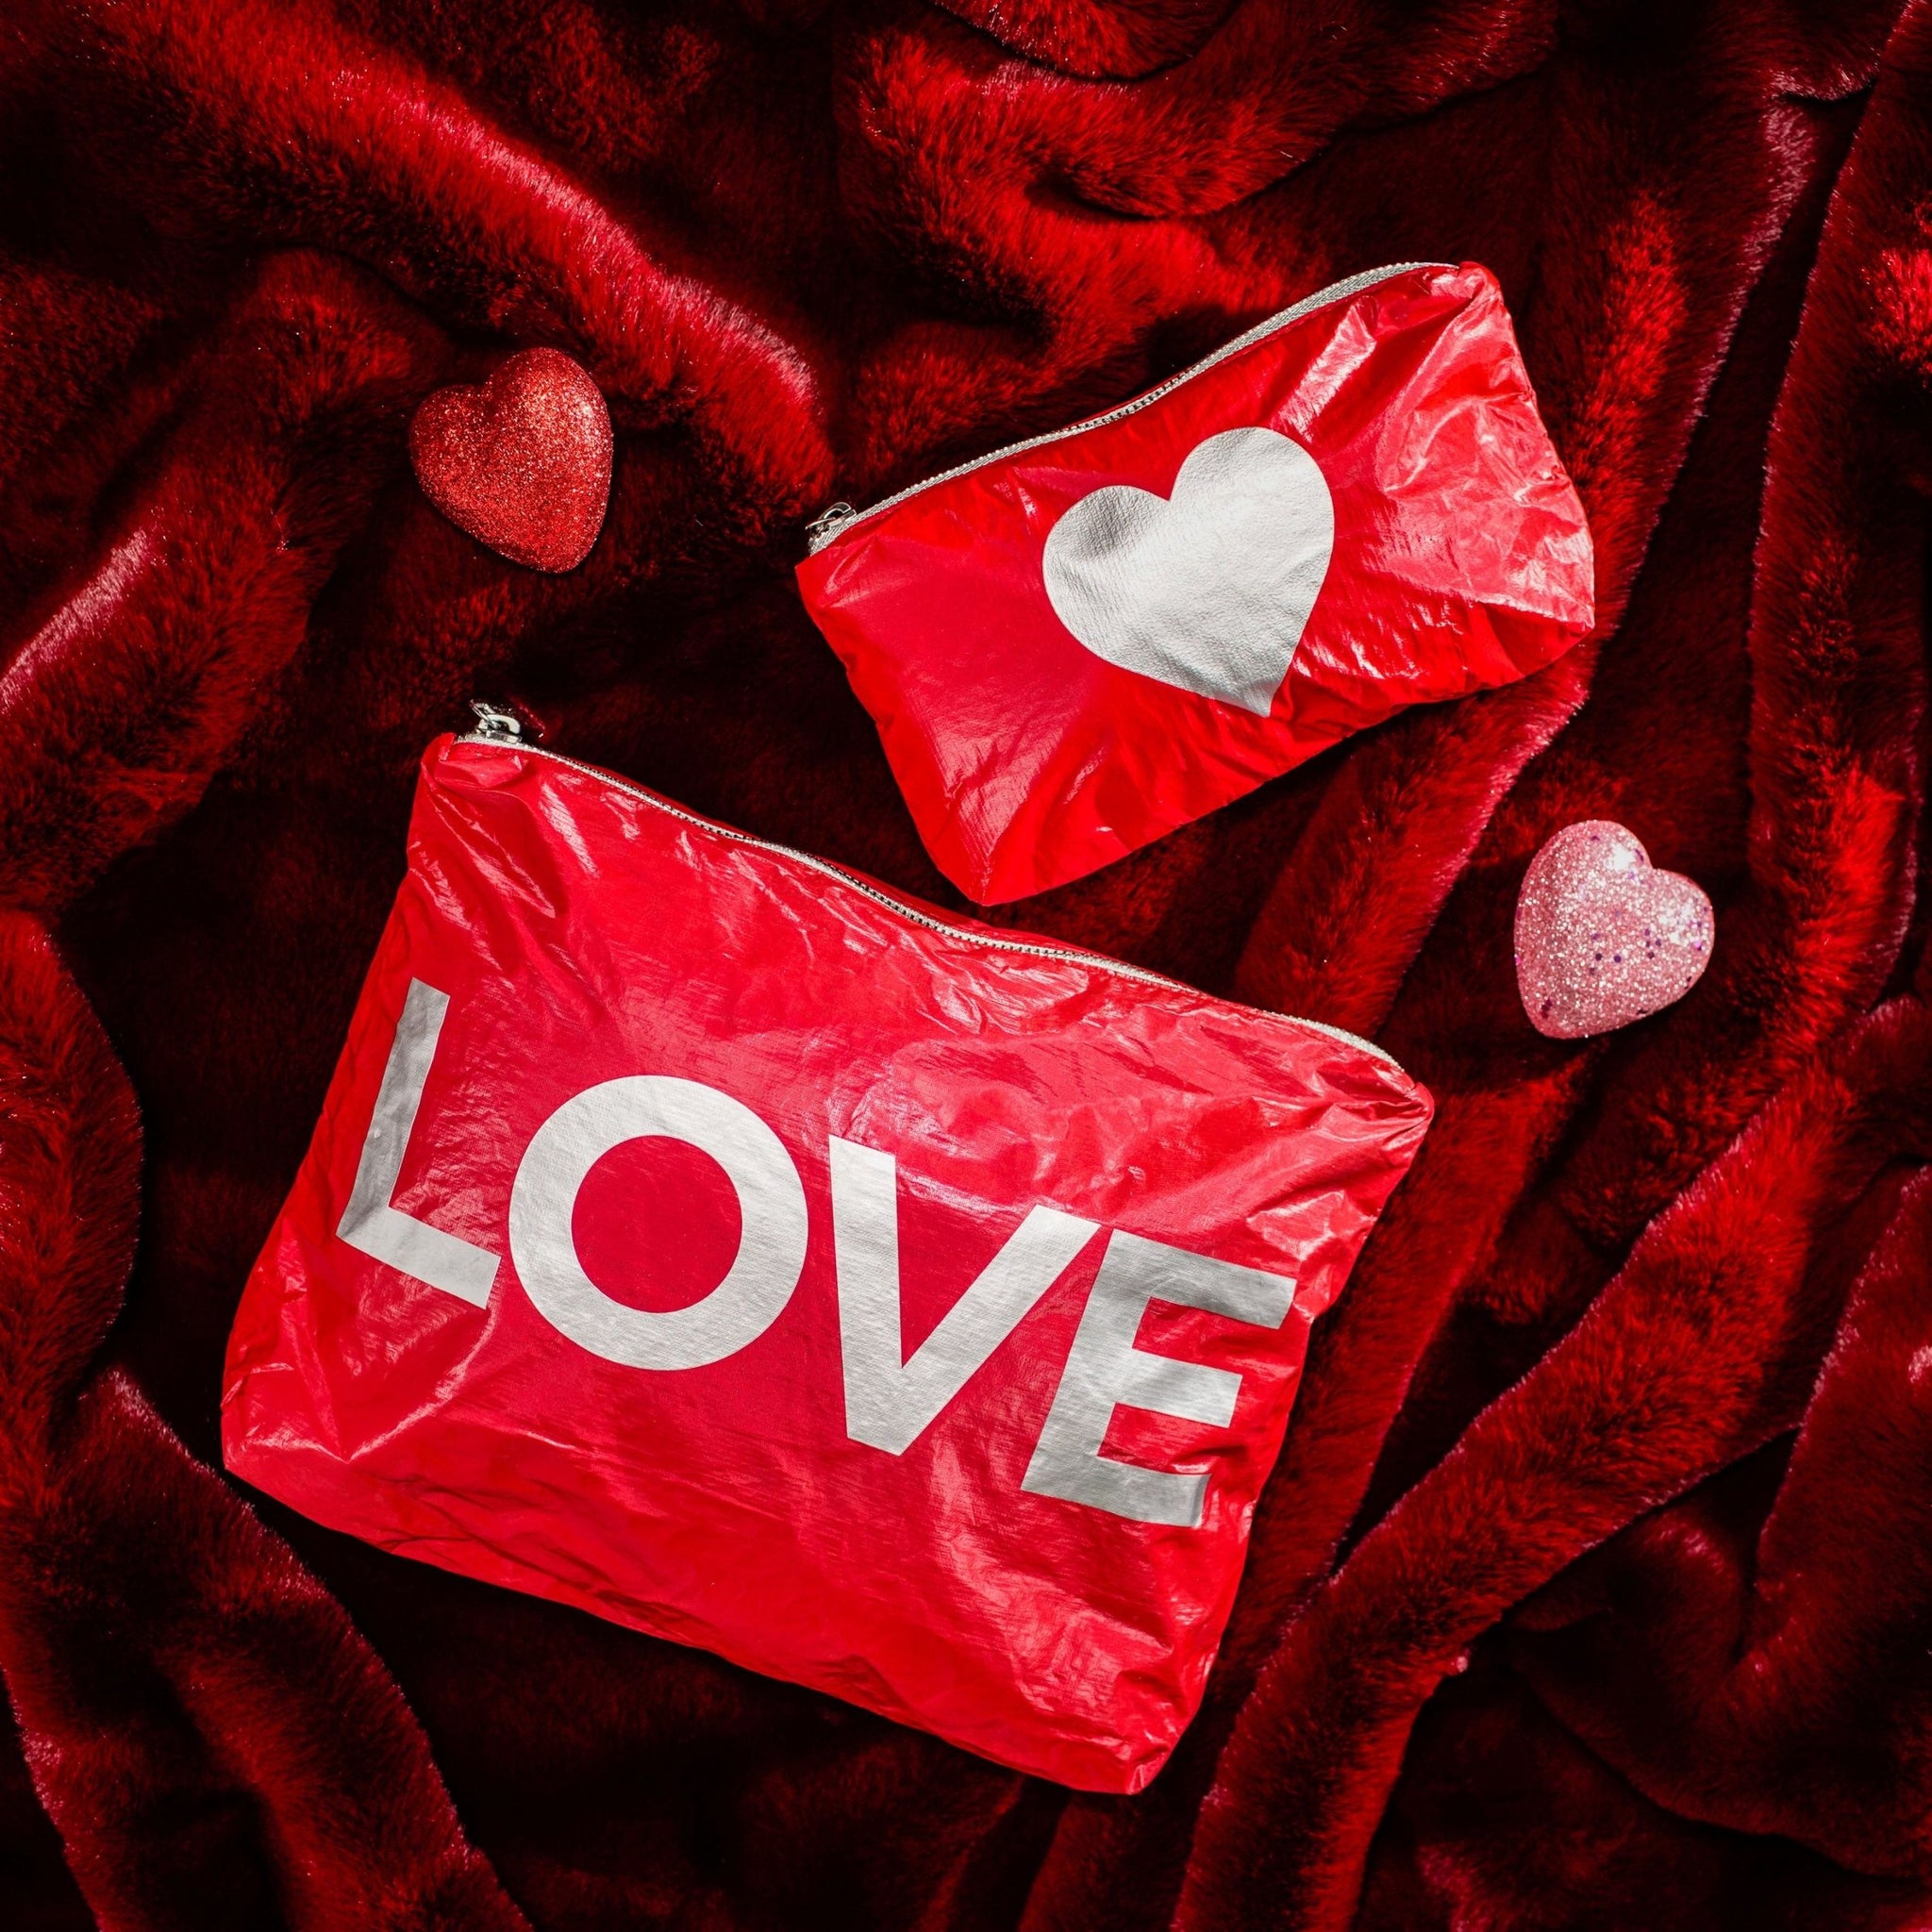 Organizational packs in red with silver "LOVE" and heart